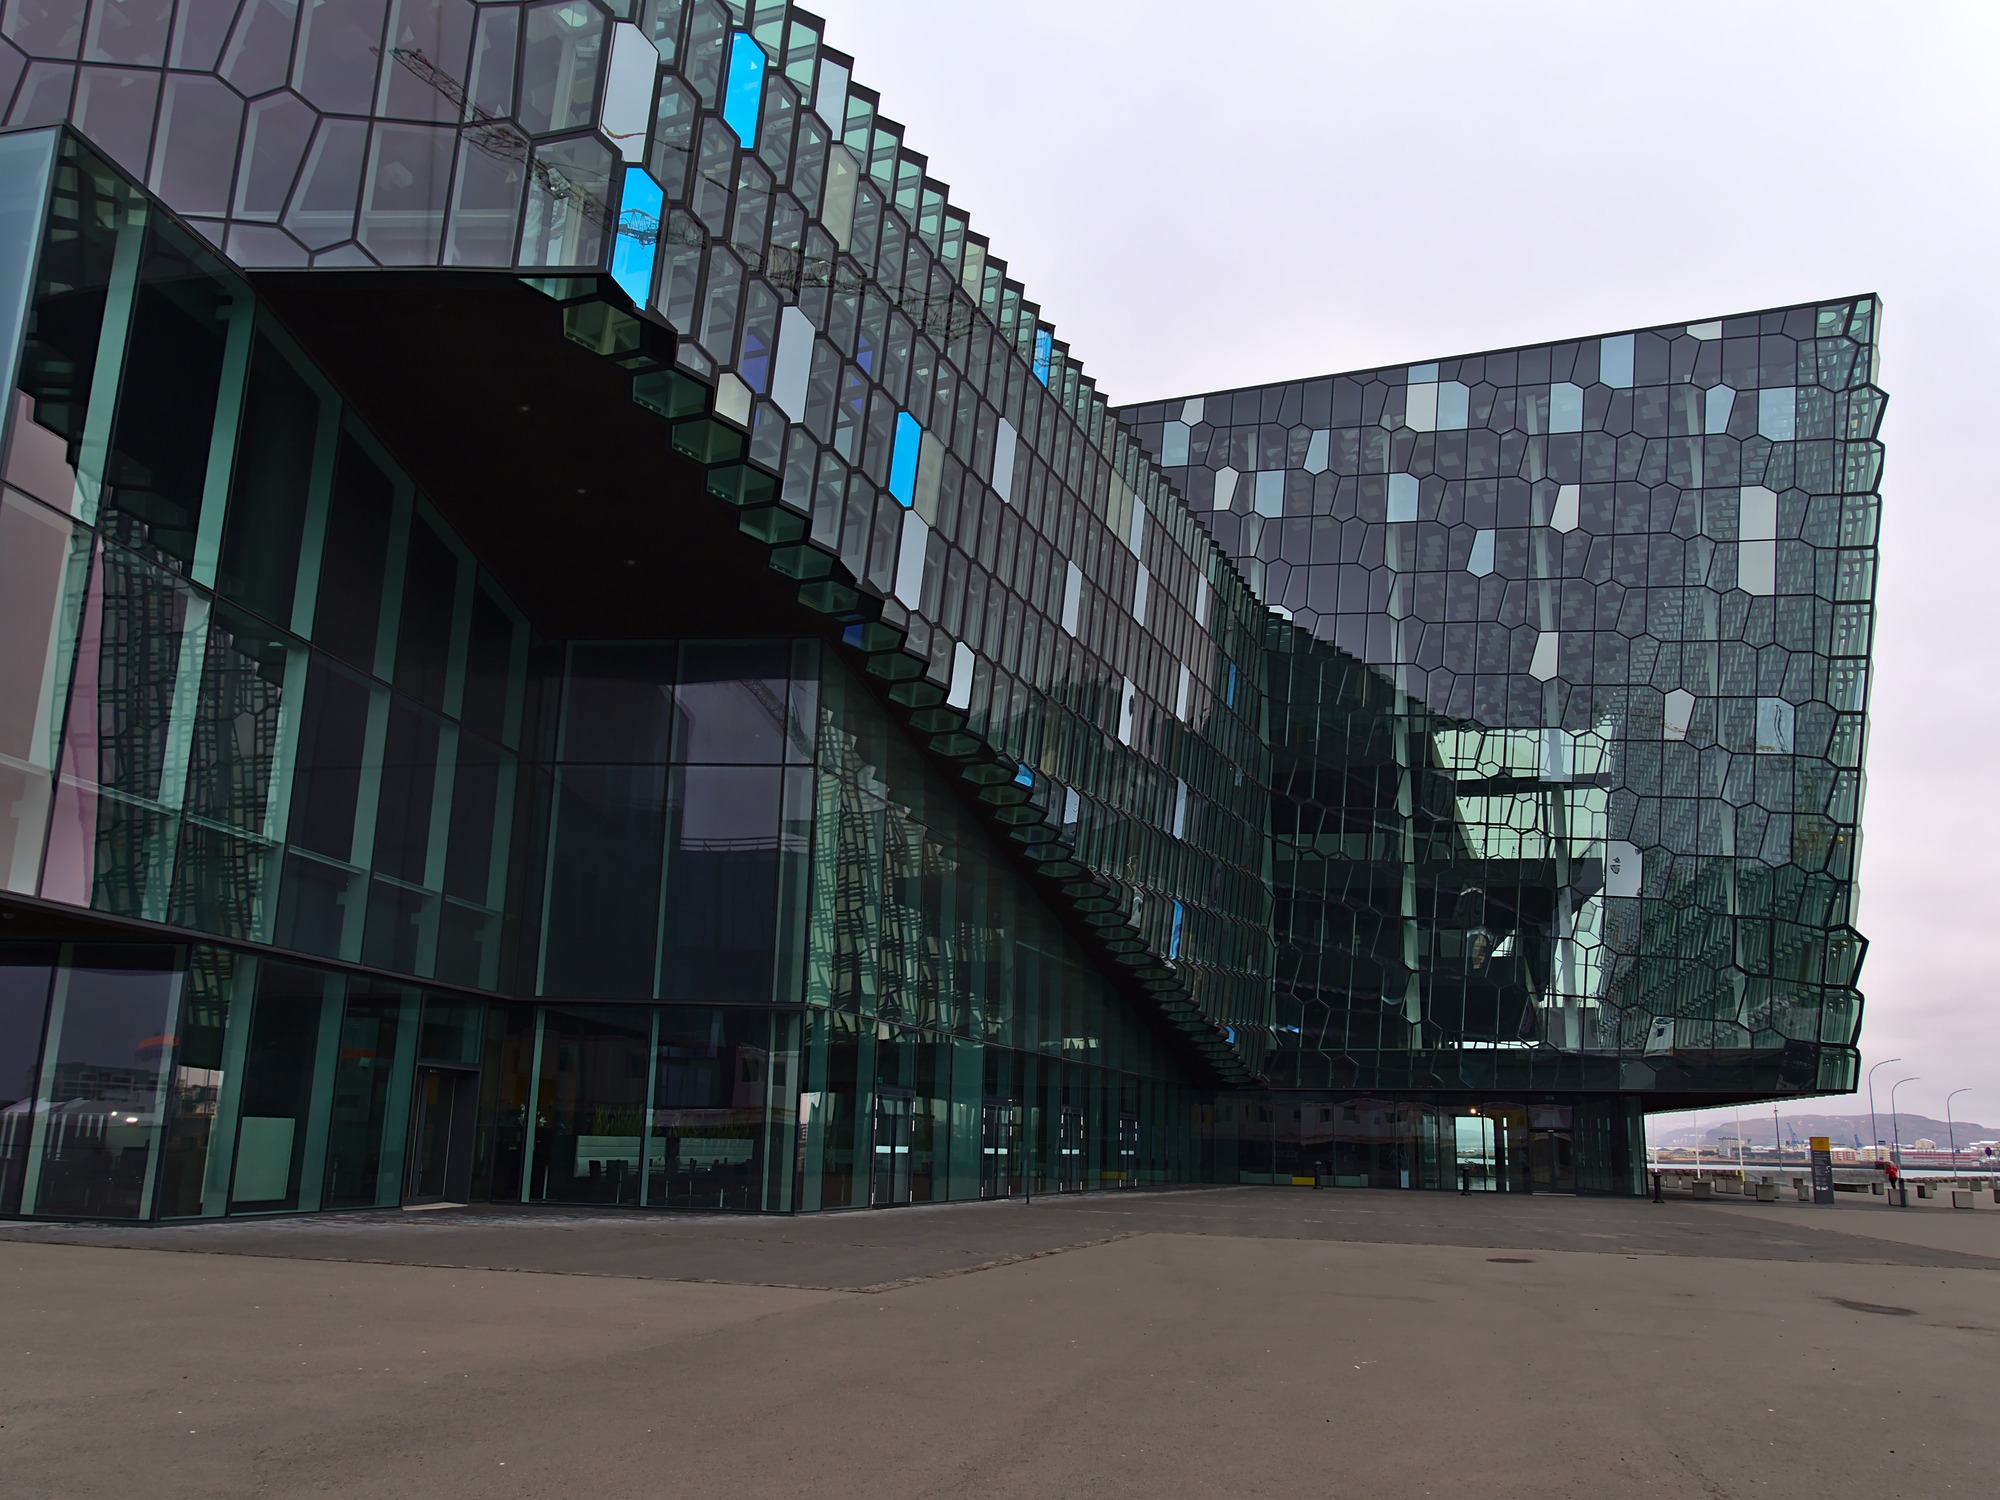 The Harpa Reykjavik Concert Hall and Conference Center in Iceland. It is a modern glass building with irregularly shaped windows.